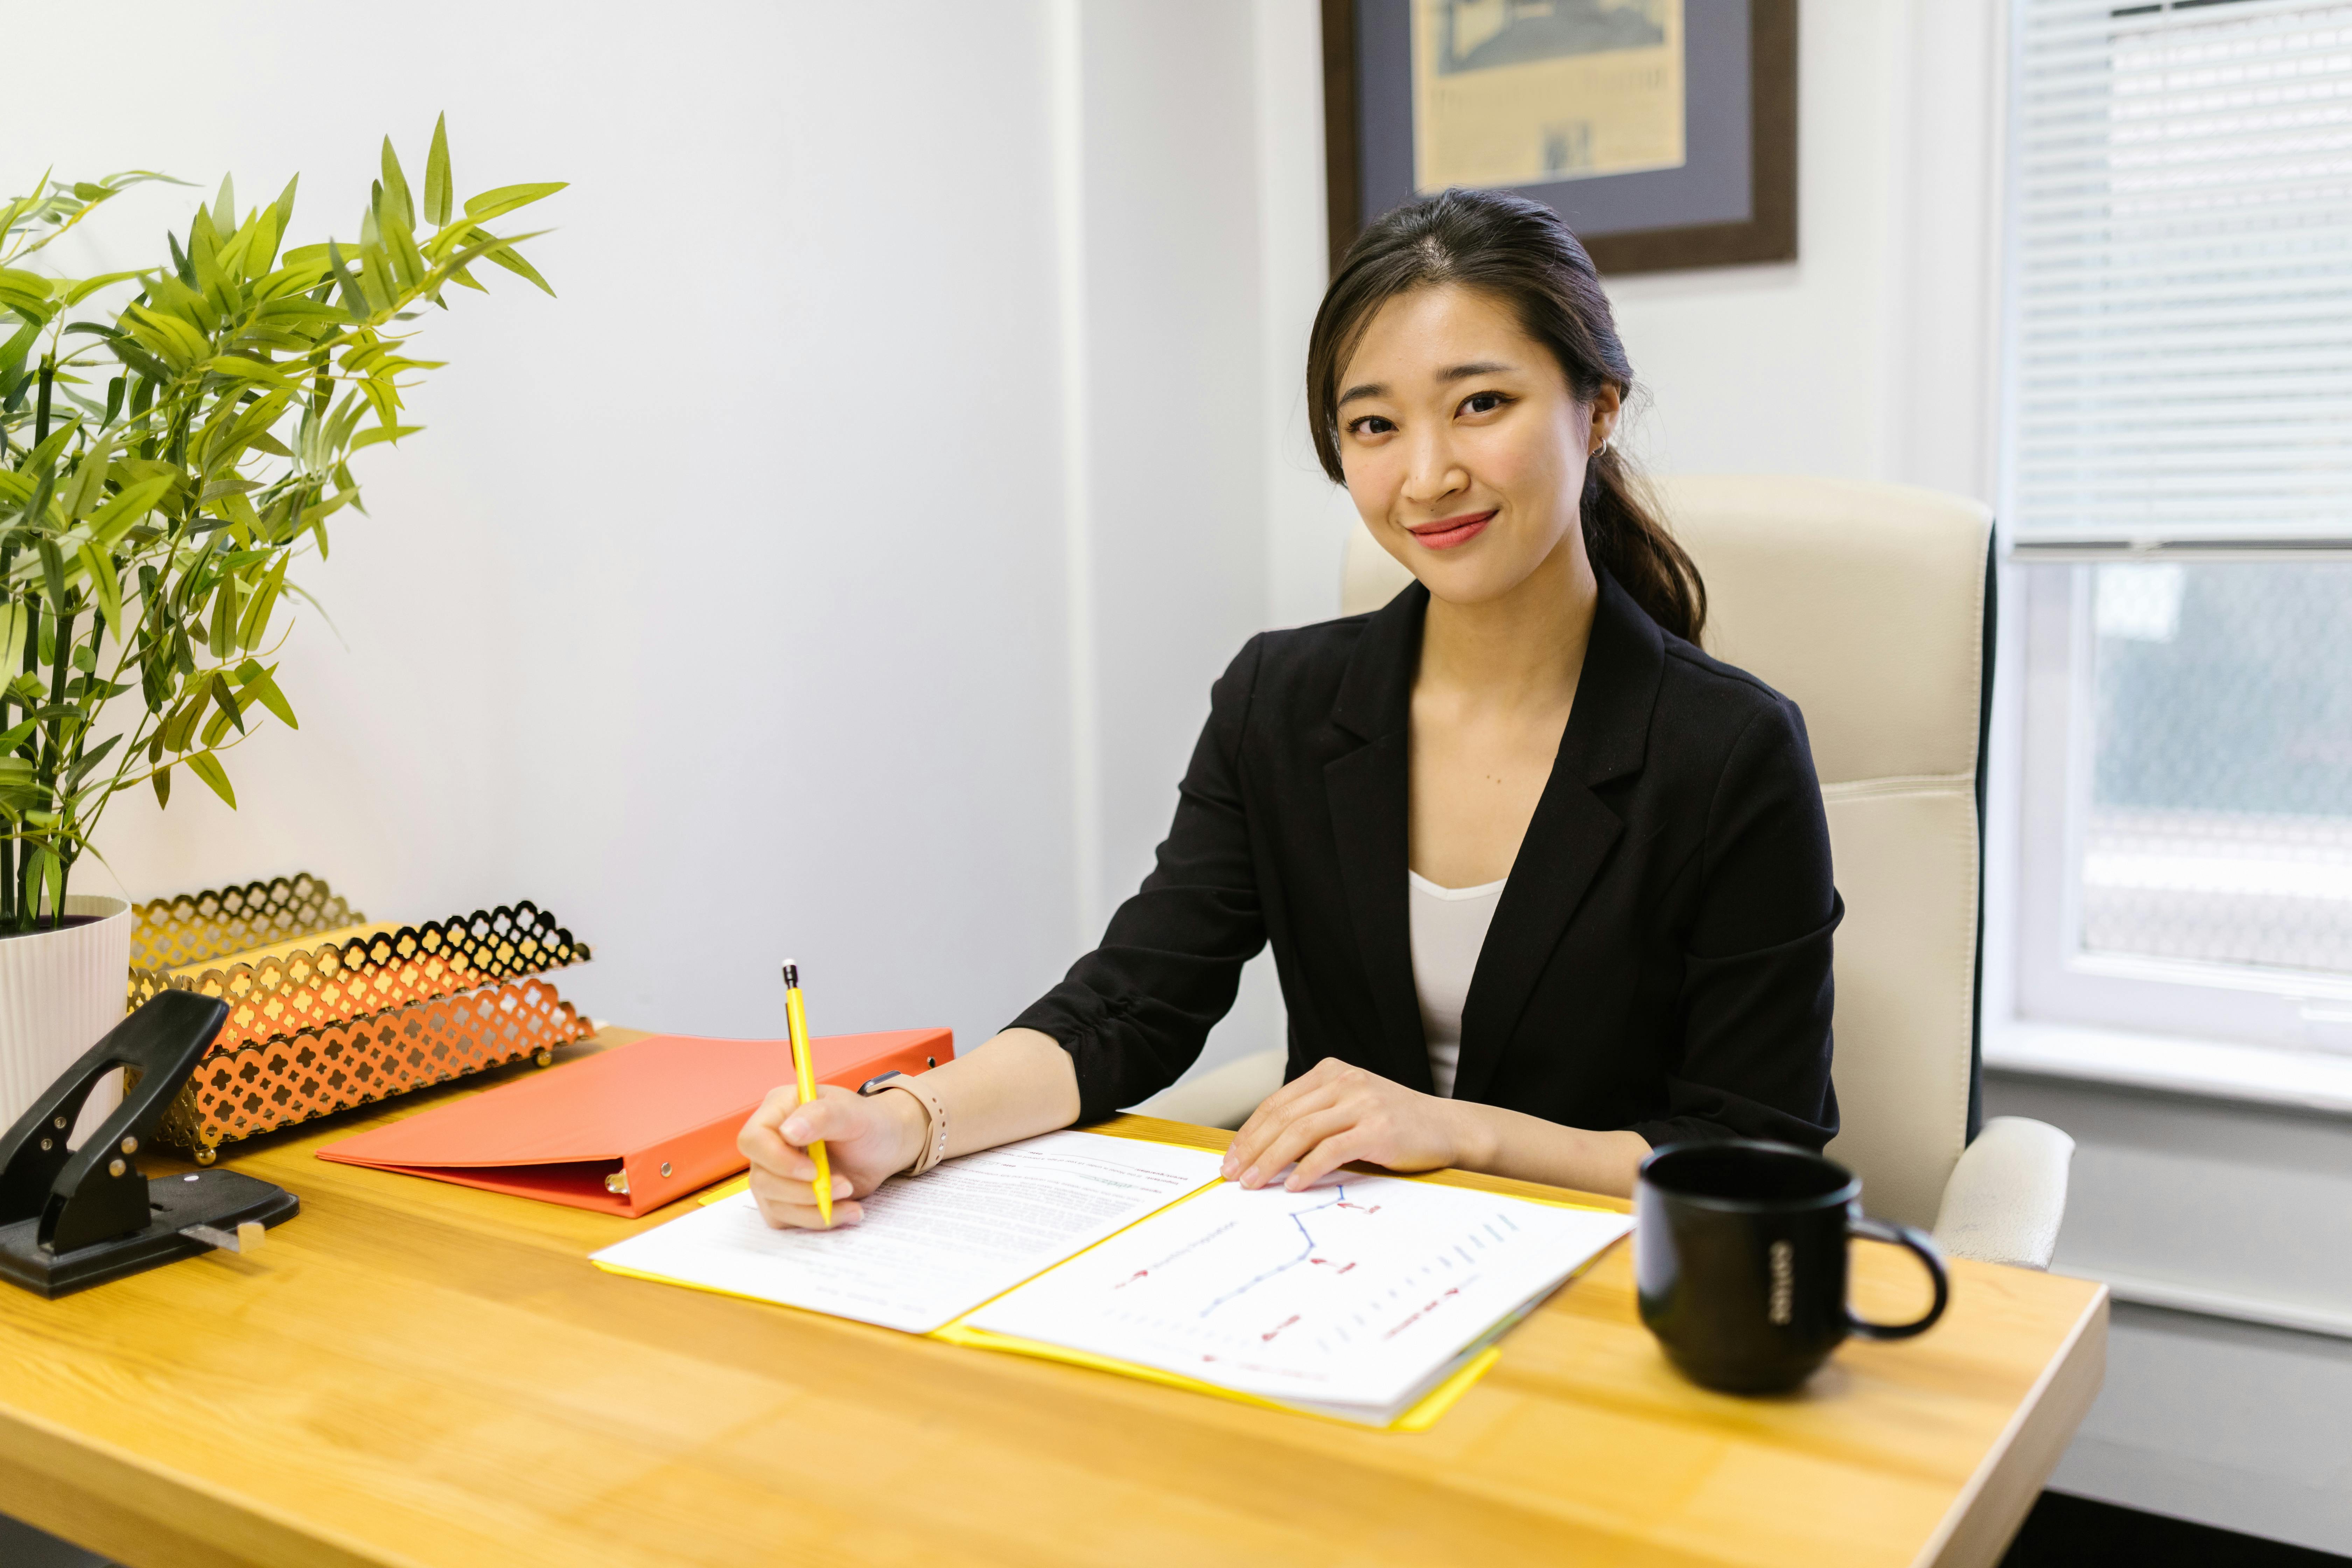 A Japanese business woman sits at her desk, pen in hand